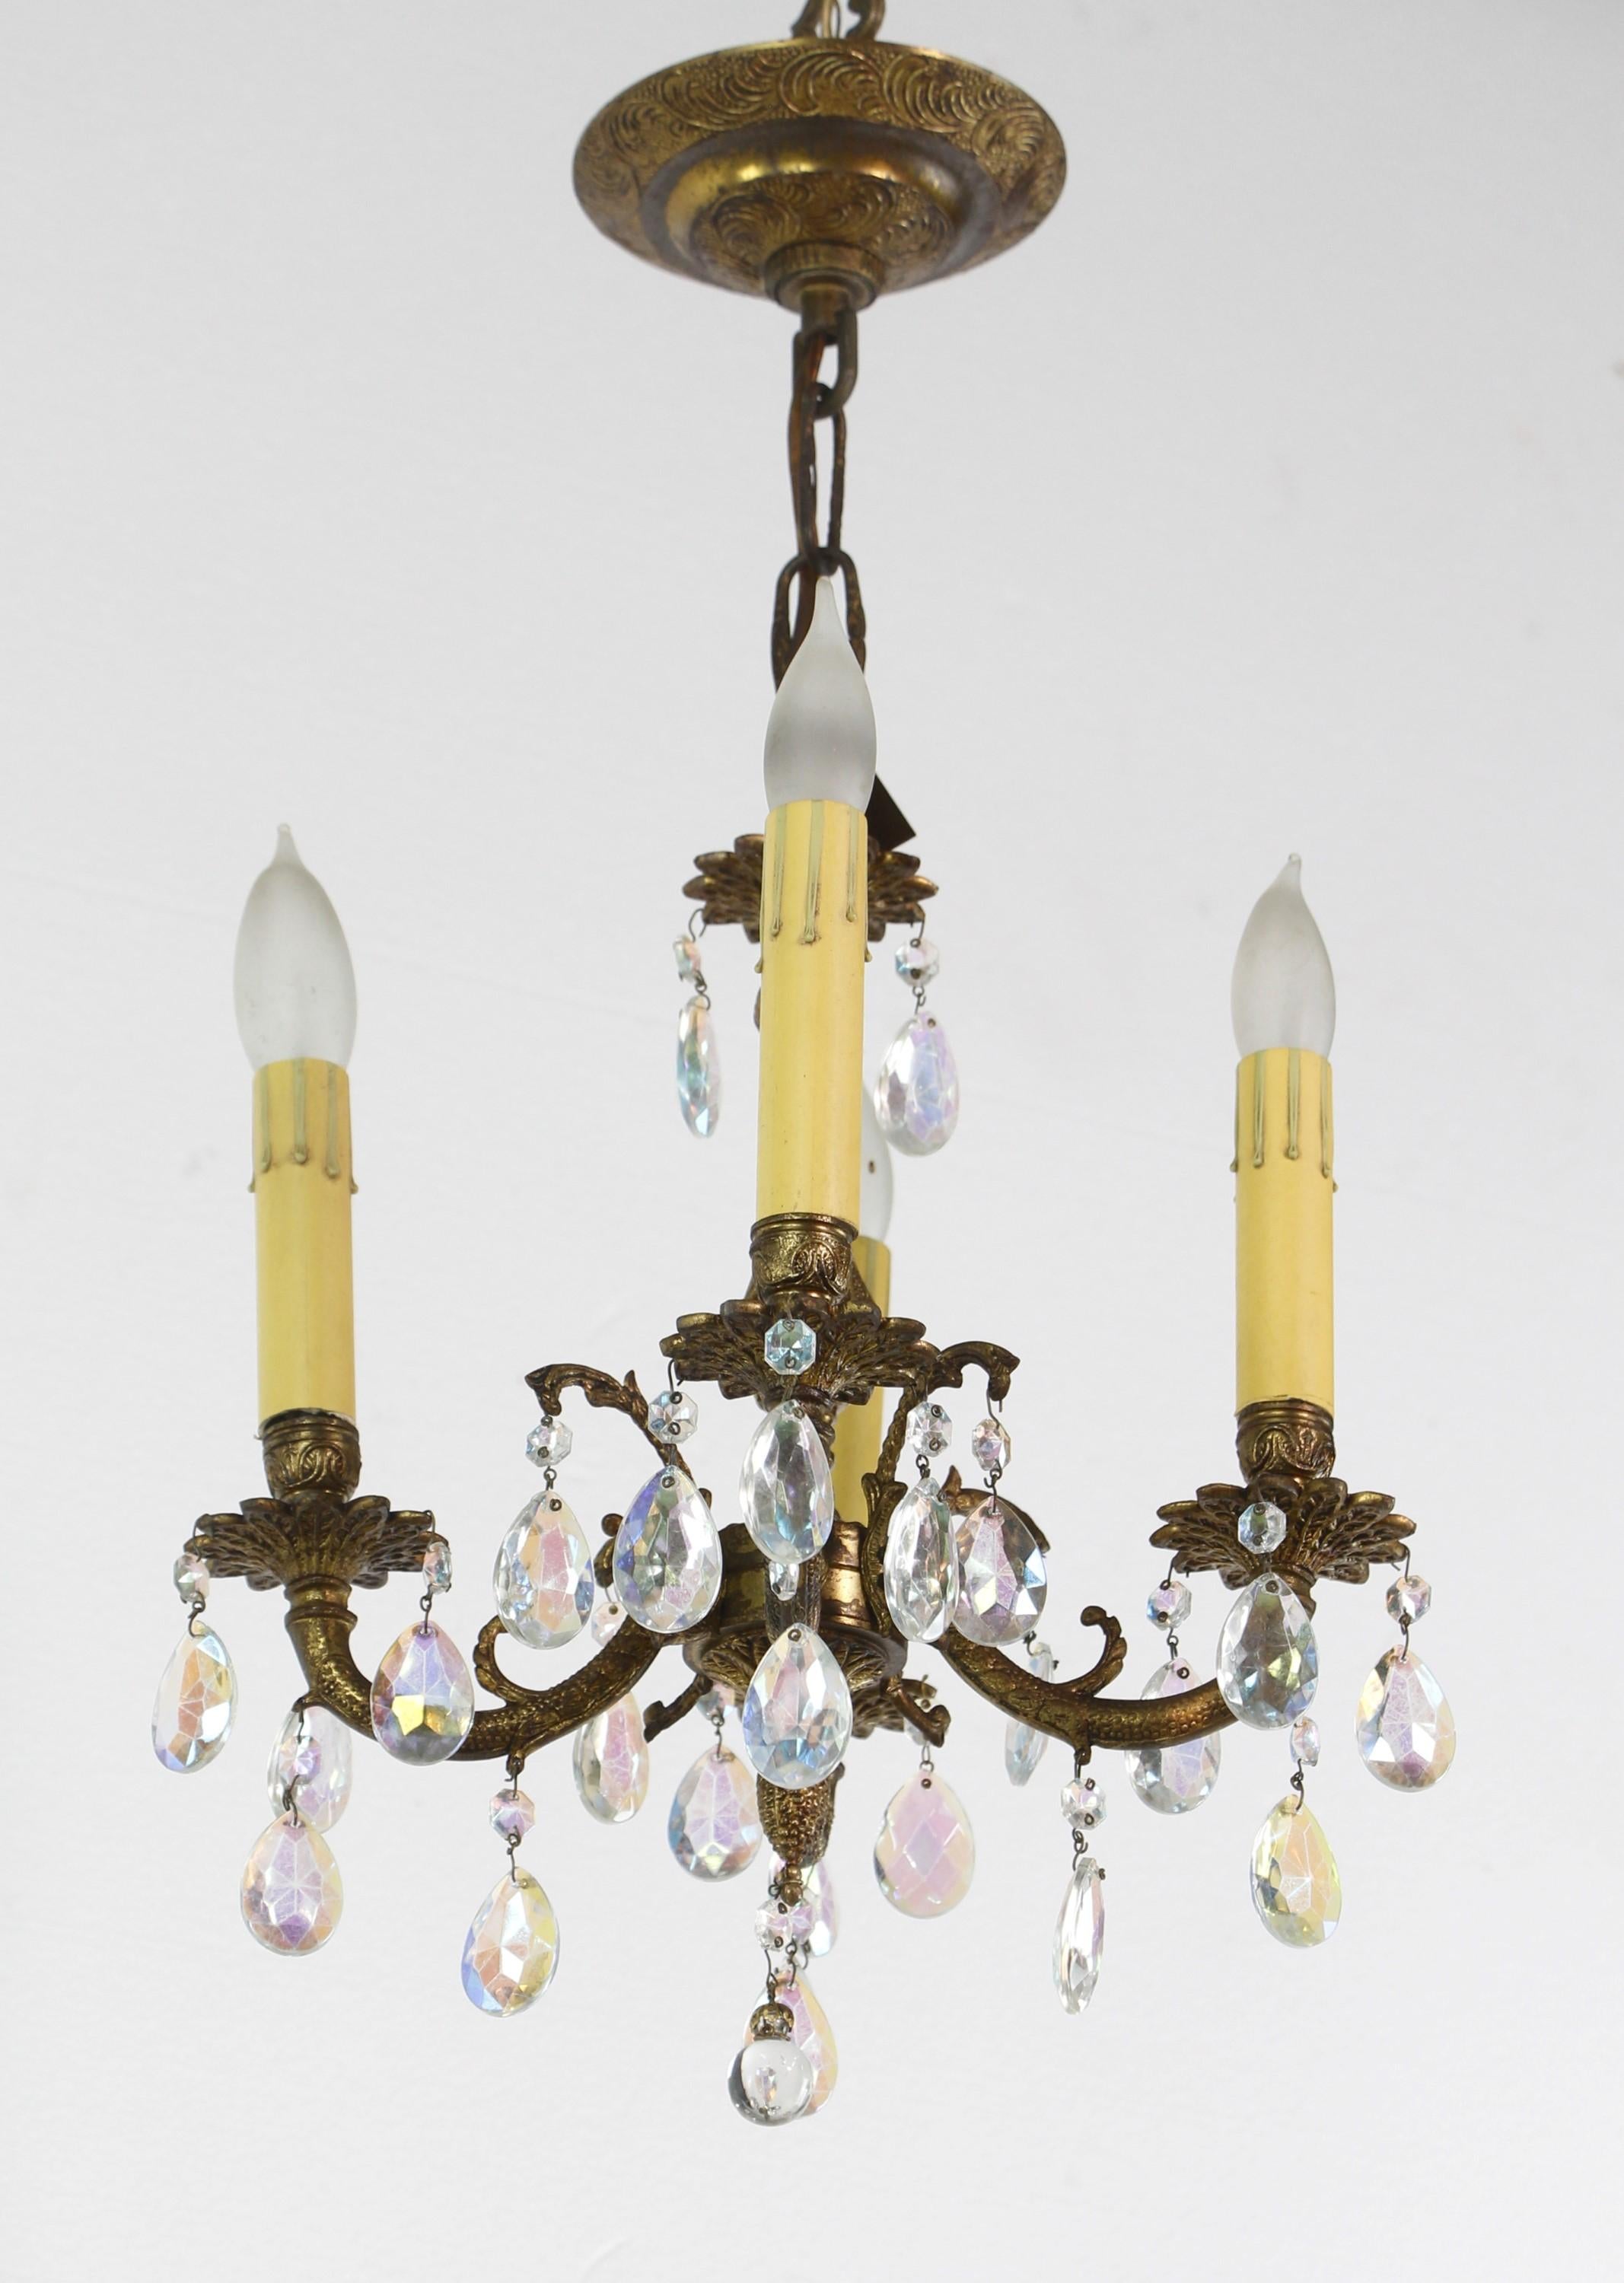 Cast bronze chandelier made in Spain adorned with iridescent crystals. Cleaned and restored. Please note, this item is located in our Scranton, PA location.